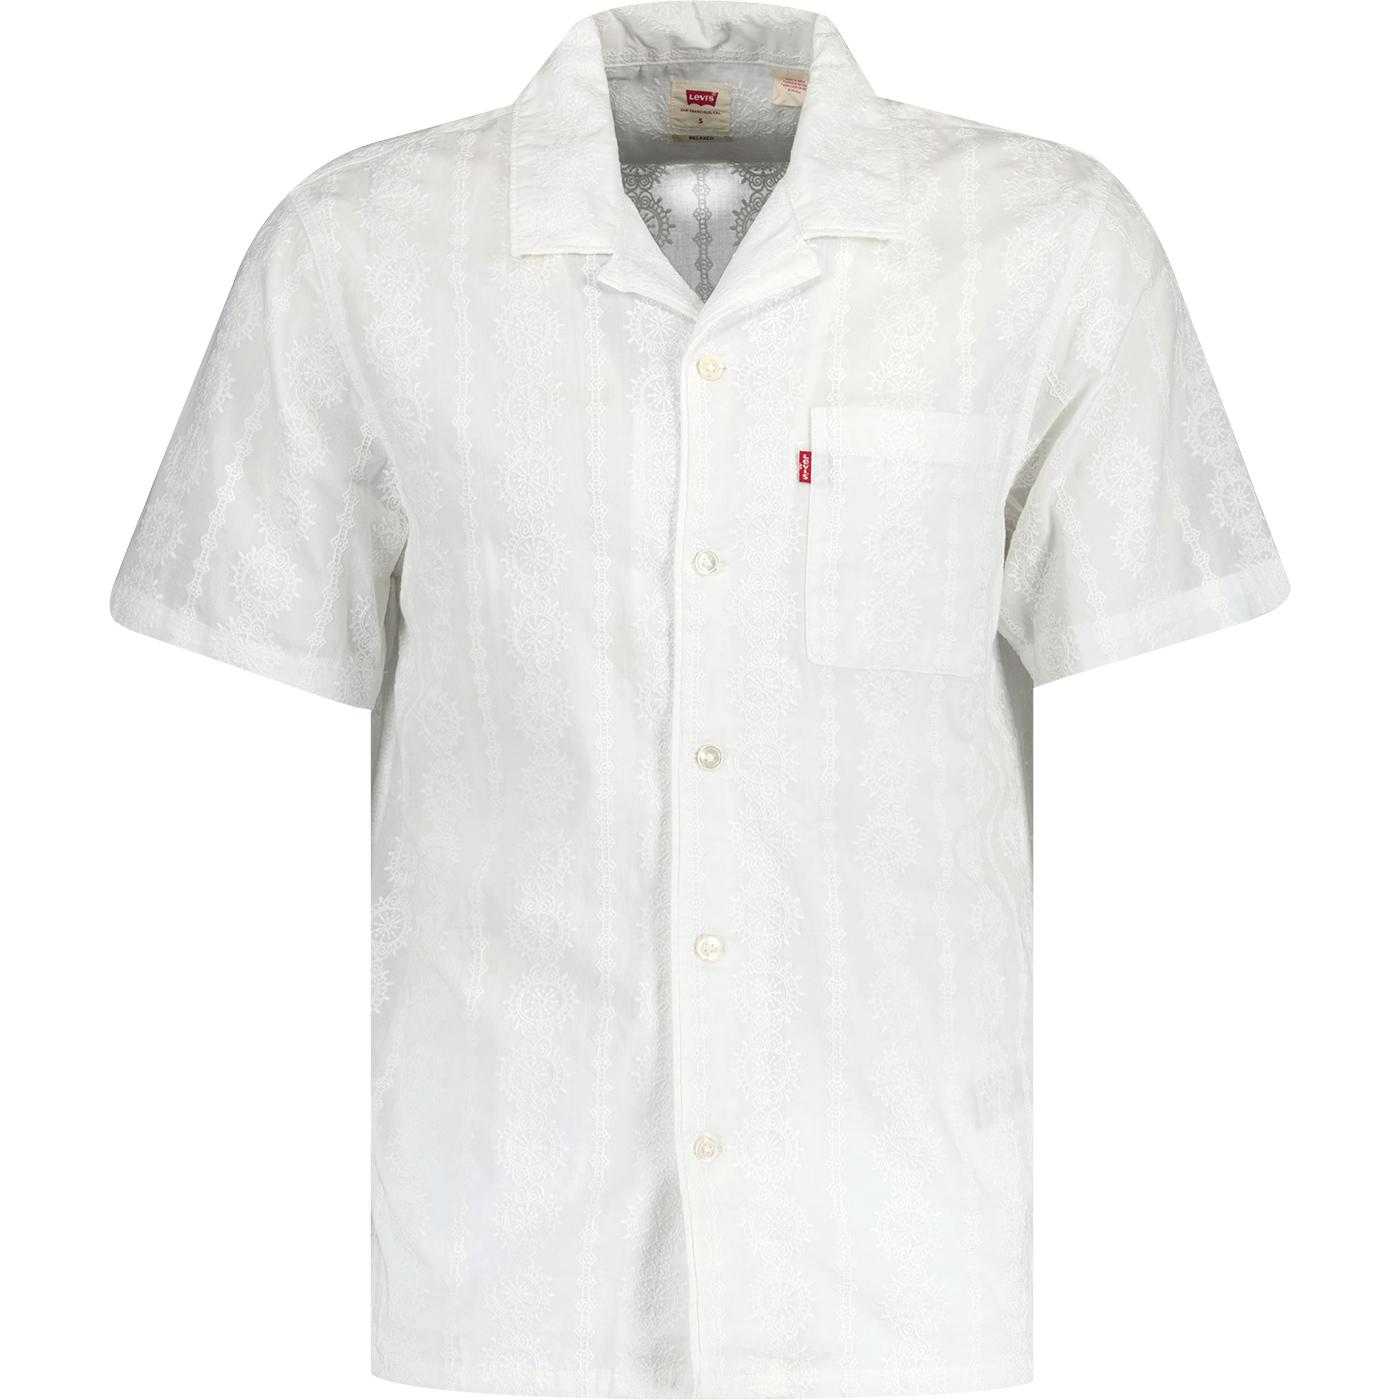 Levi's® Retro 50s Sunset Camp Embroidered Shirt 